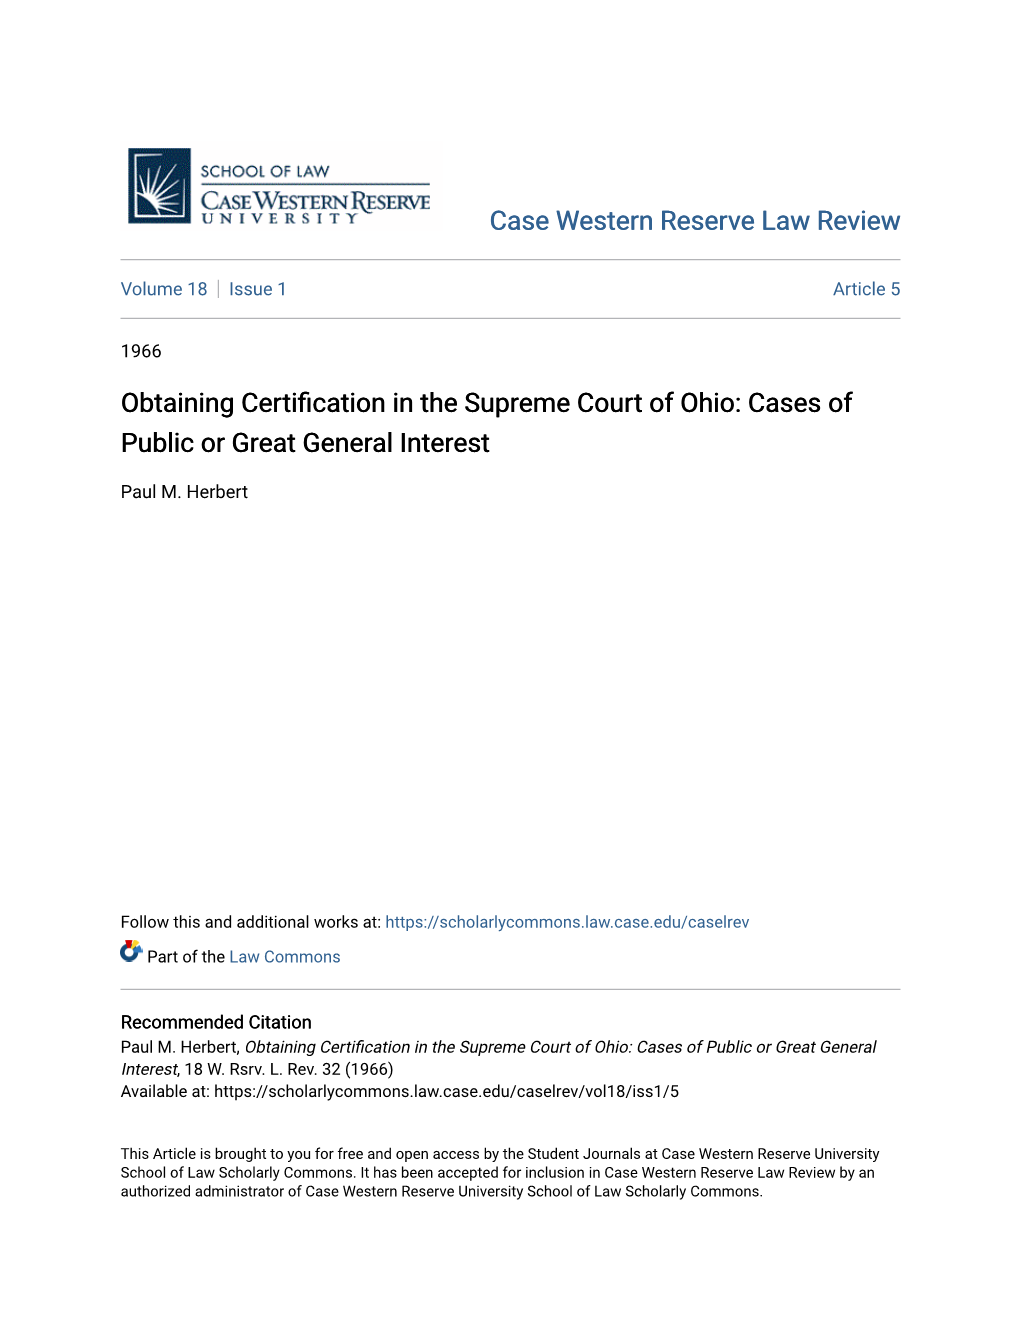 Obtaining Certification in the Supreme Court of Ohio: Cases of Public Or Great General Interest